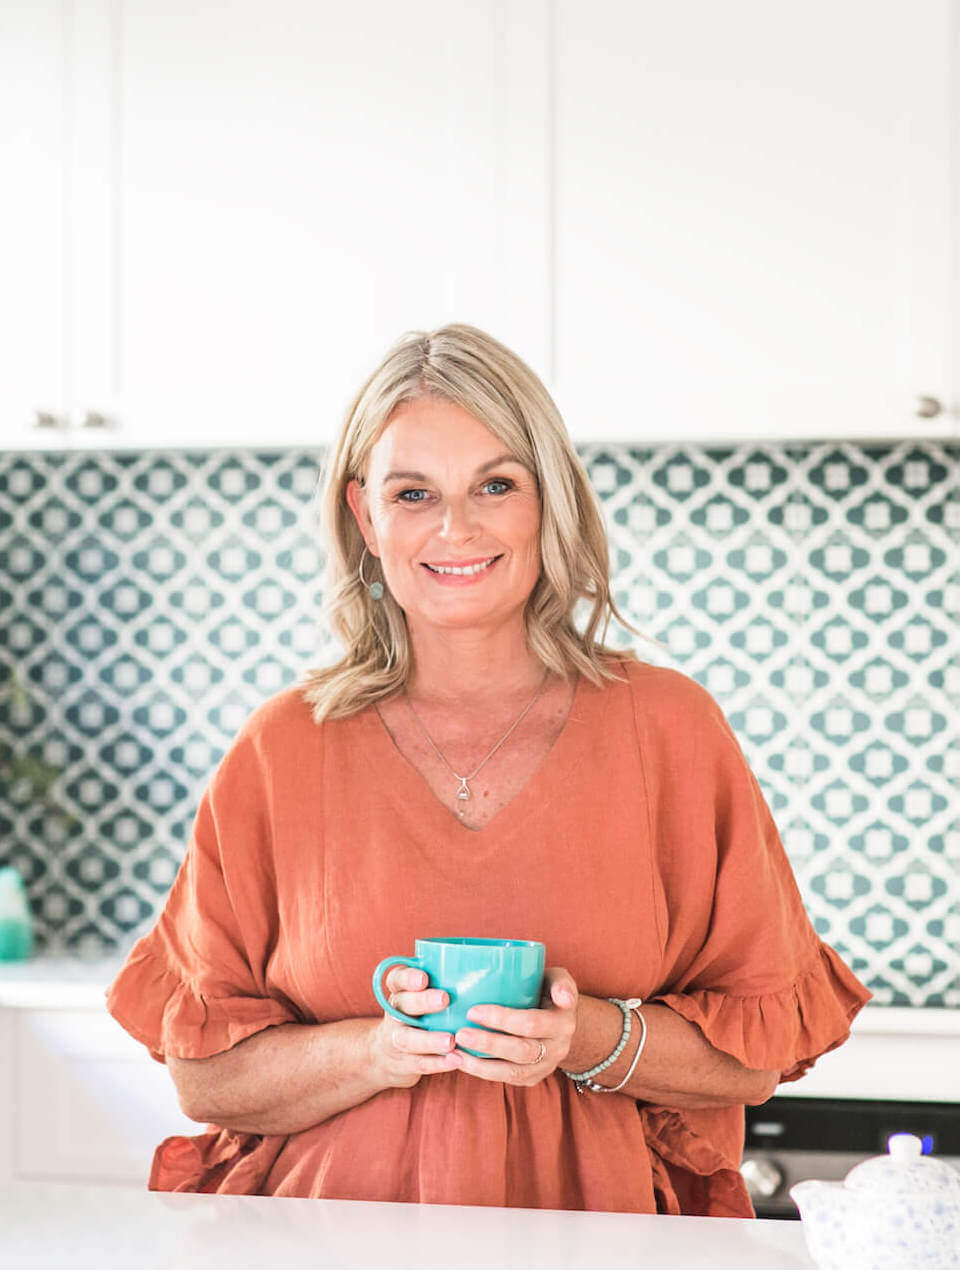 Rachel Scoltock Angel Medium holding a cup of tea and wearing a terracotta coloured top in an aqua kitchen